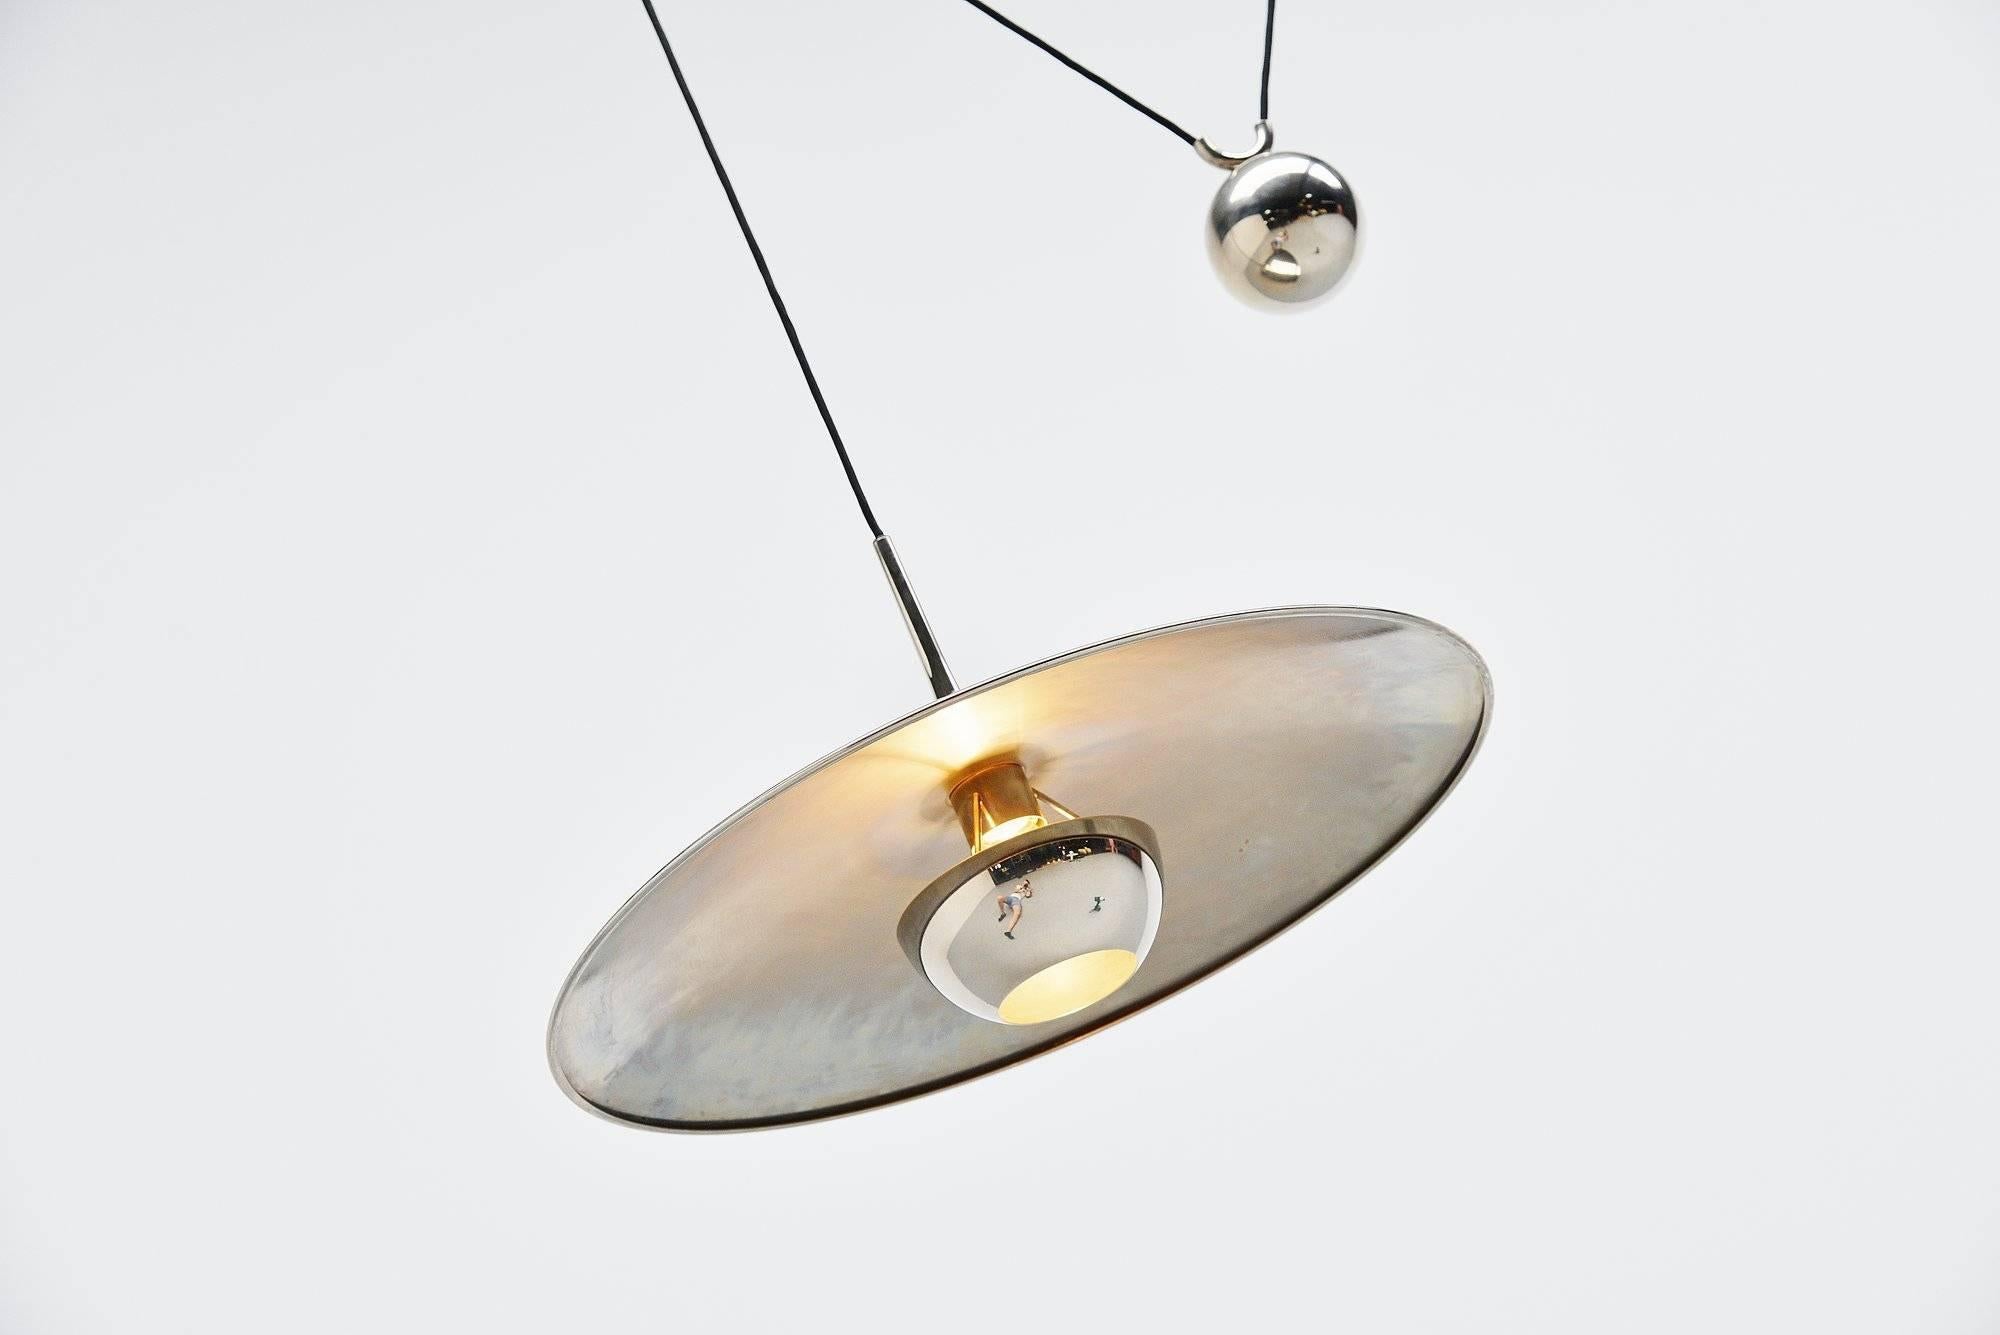 Plated Florian Schulz Onos 55 Pendant Lamp in Chrome, Germany, 1970